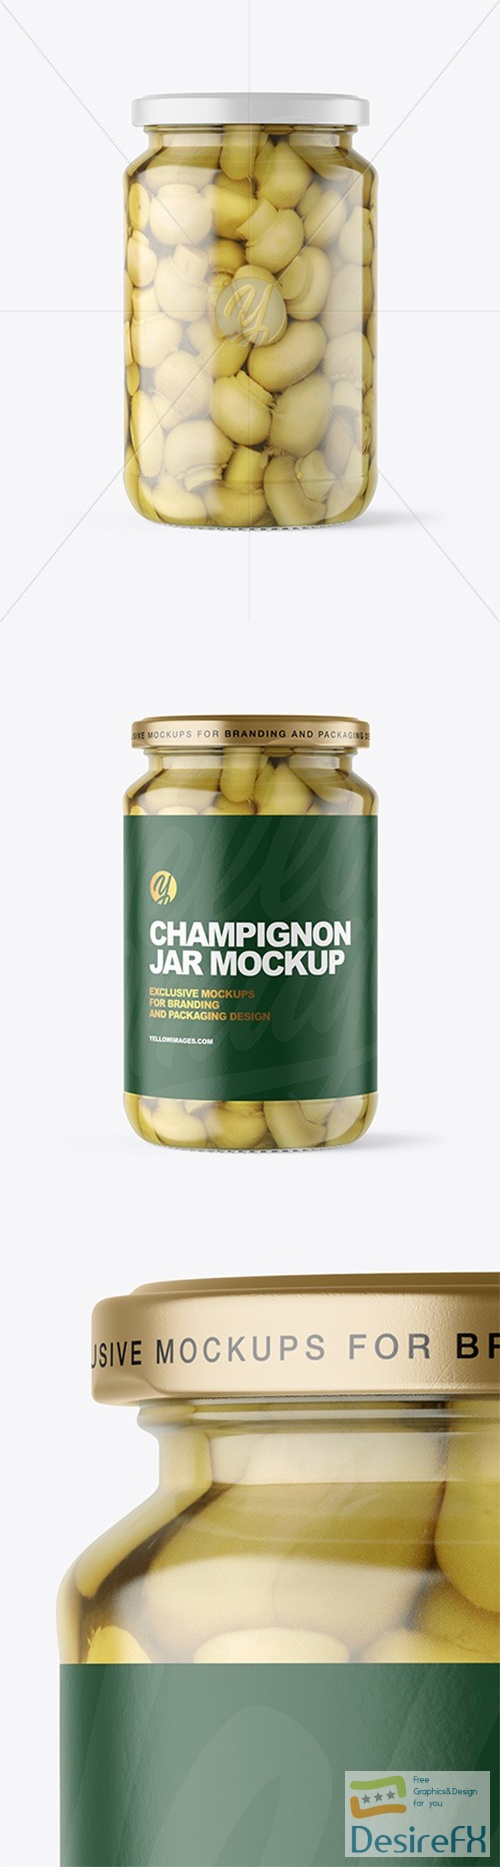 Clear Glass Jar with Champignons Mockup 97186